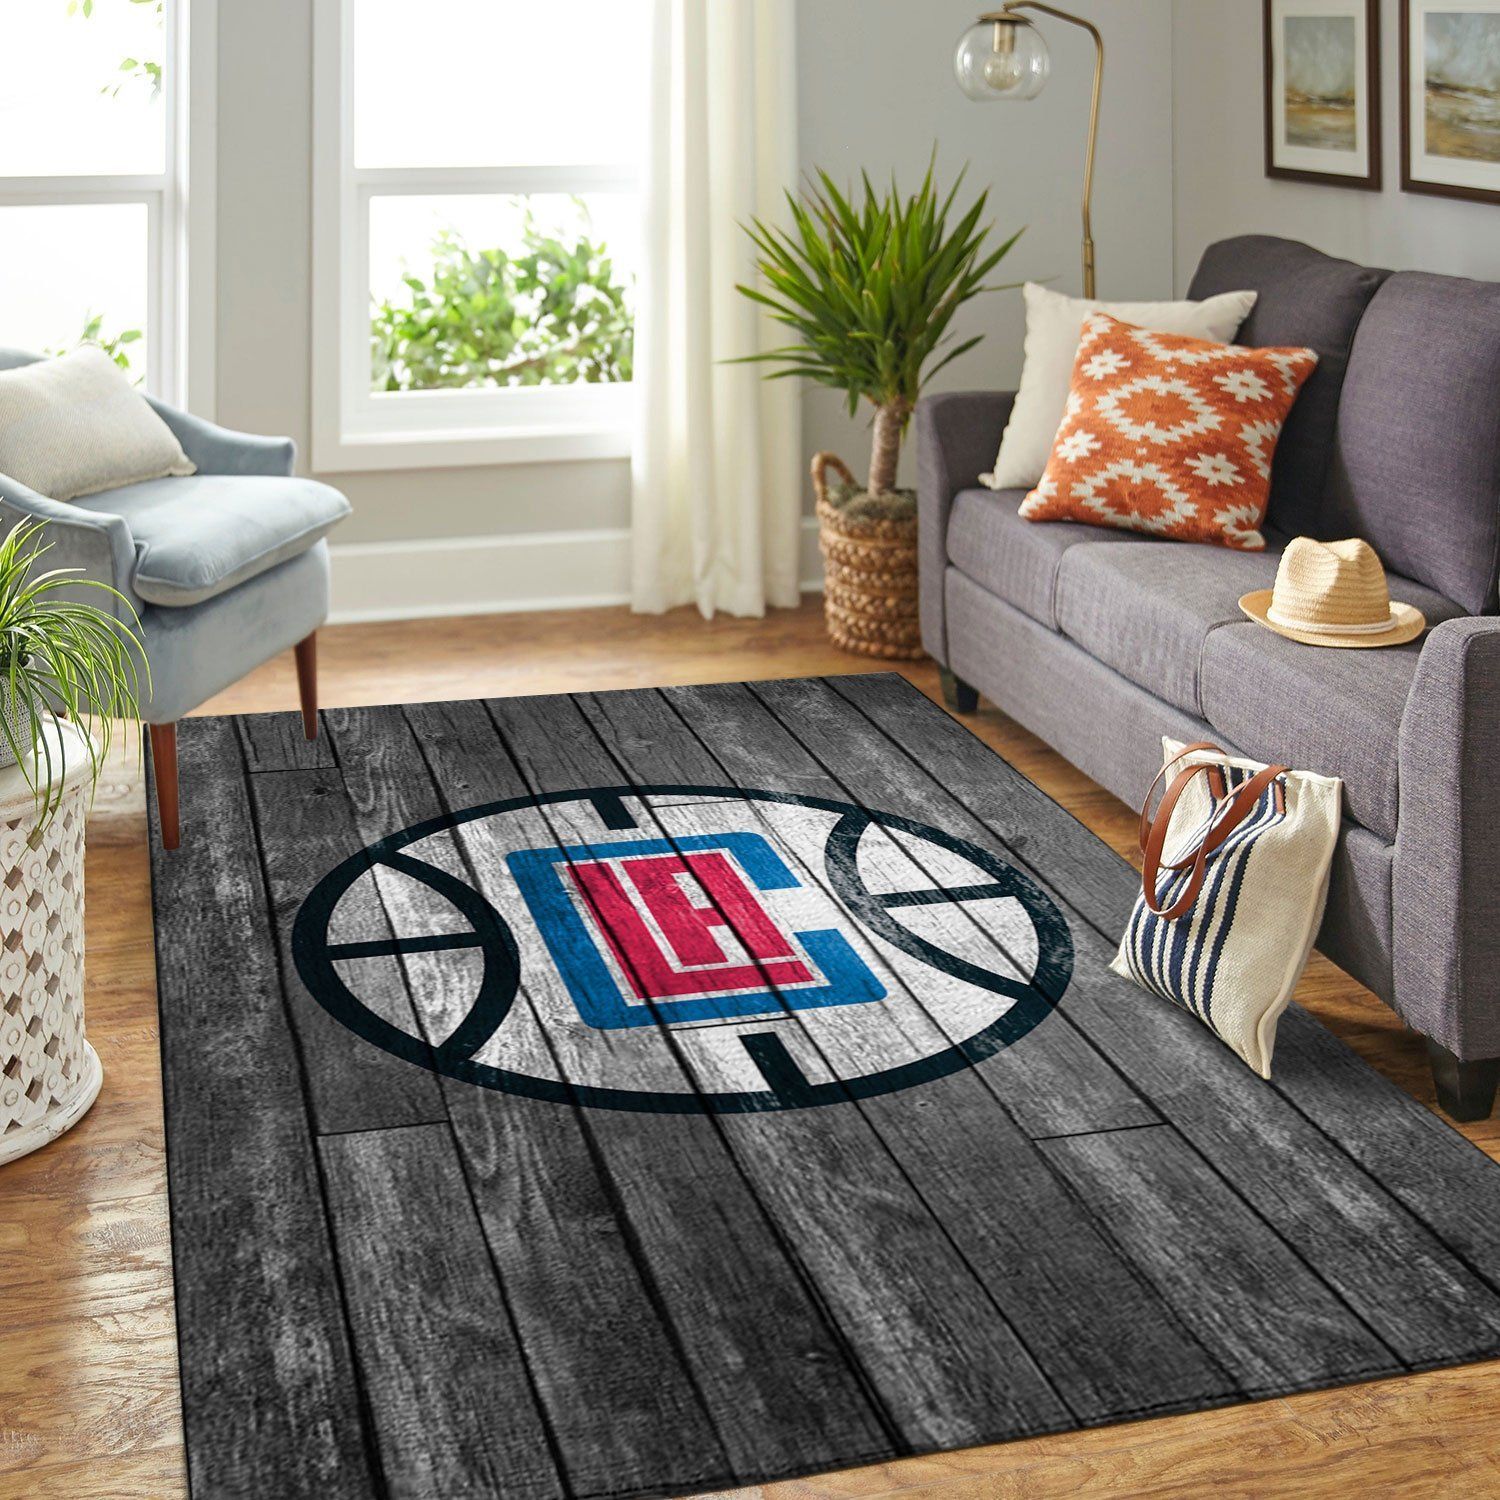 La Clippers Nba Team Logo Grey Wooden Style Nice Gift Home Decor Rectangle Area Rug - Indoor Outdoor Rugs